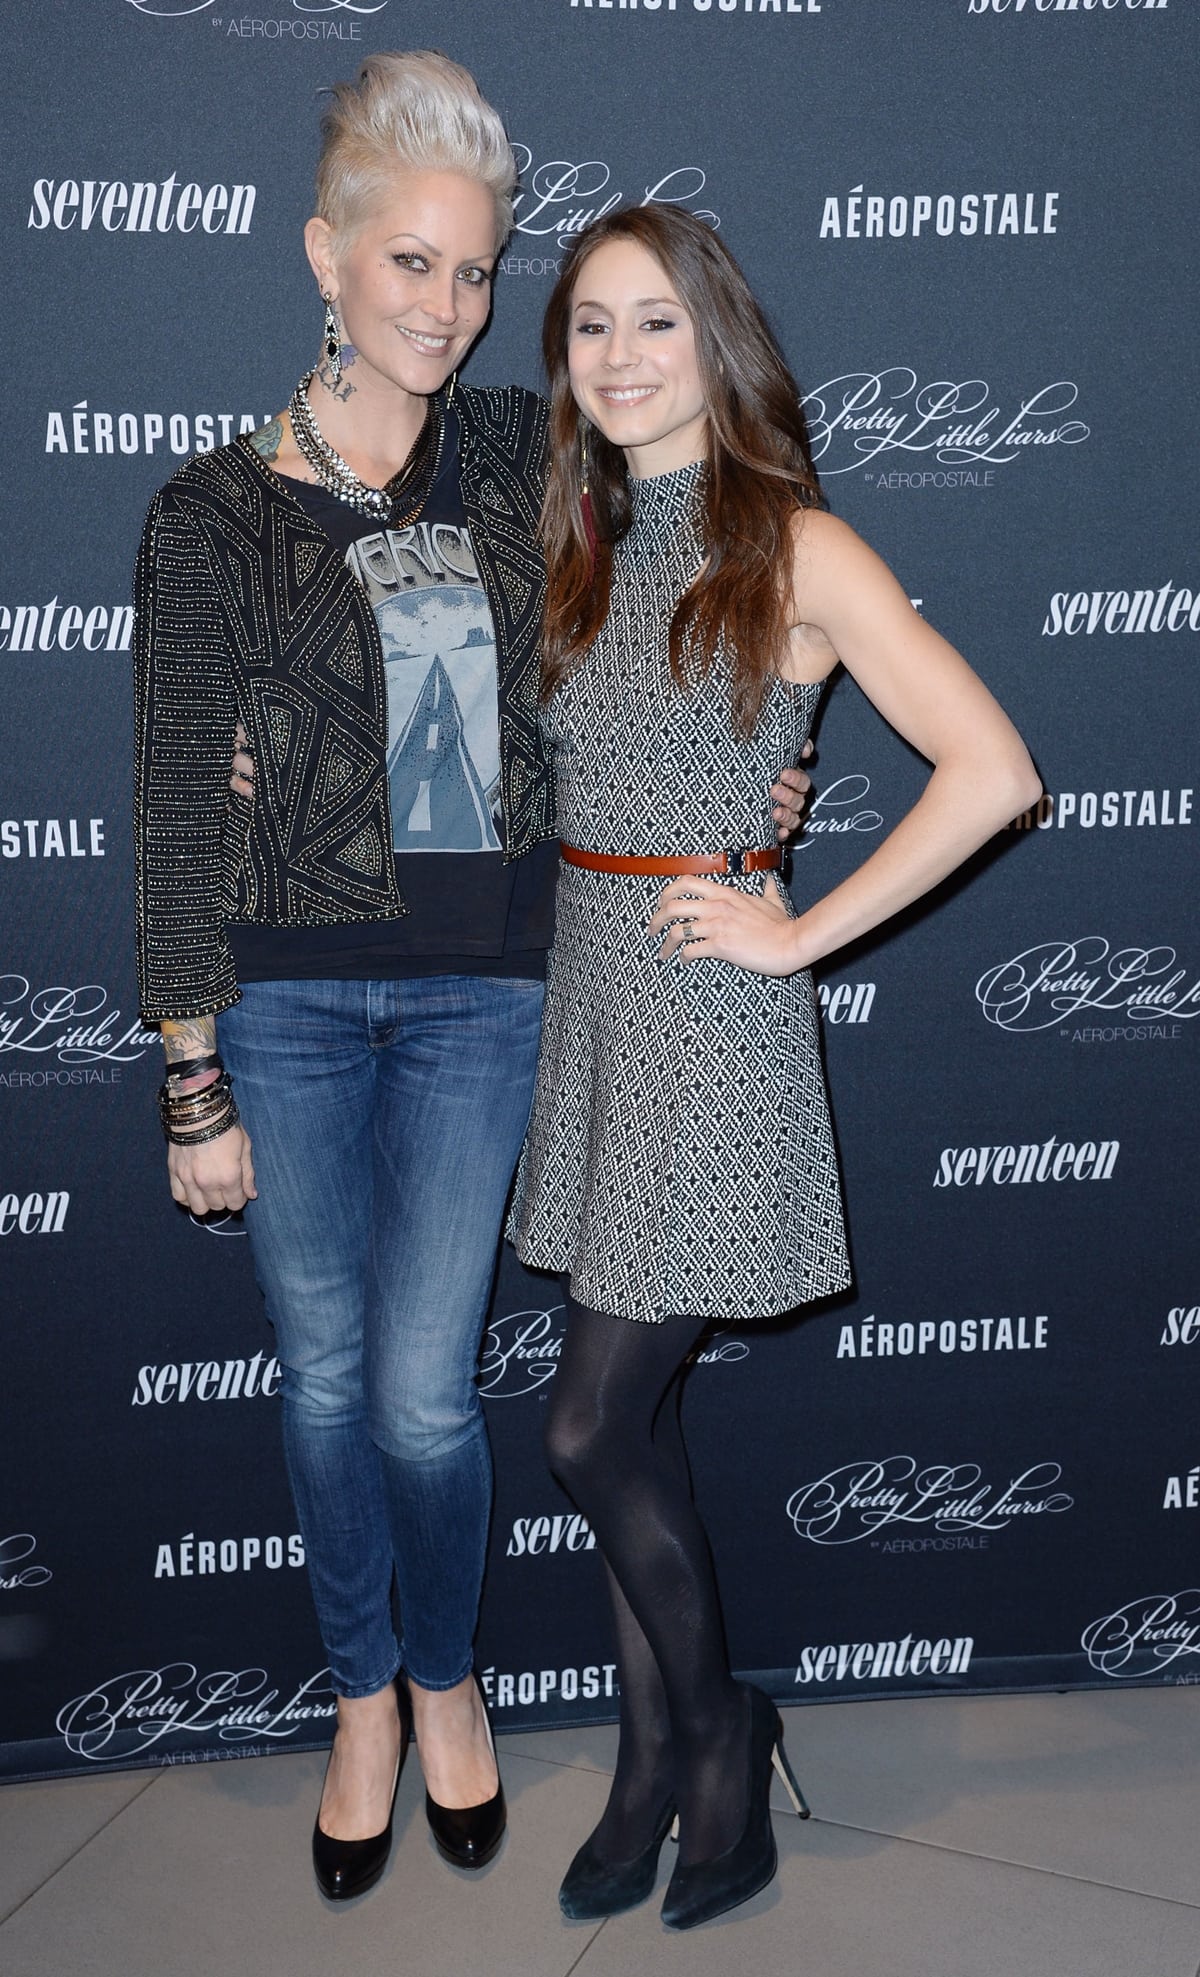 Designer Mandi Lane and actress Troian Bellisario attend the "Pretty Little Liars" fashion collection launch event at Aeropostale Times Square